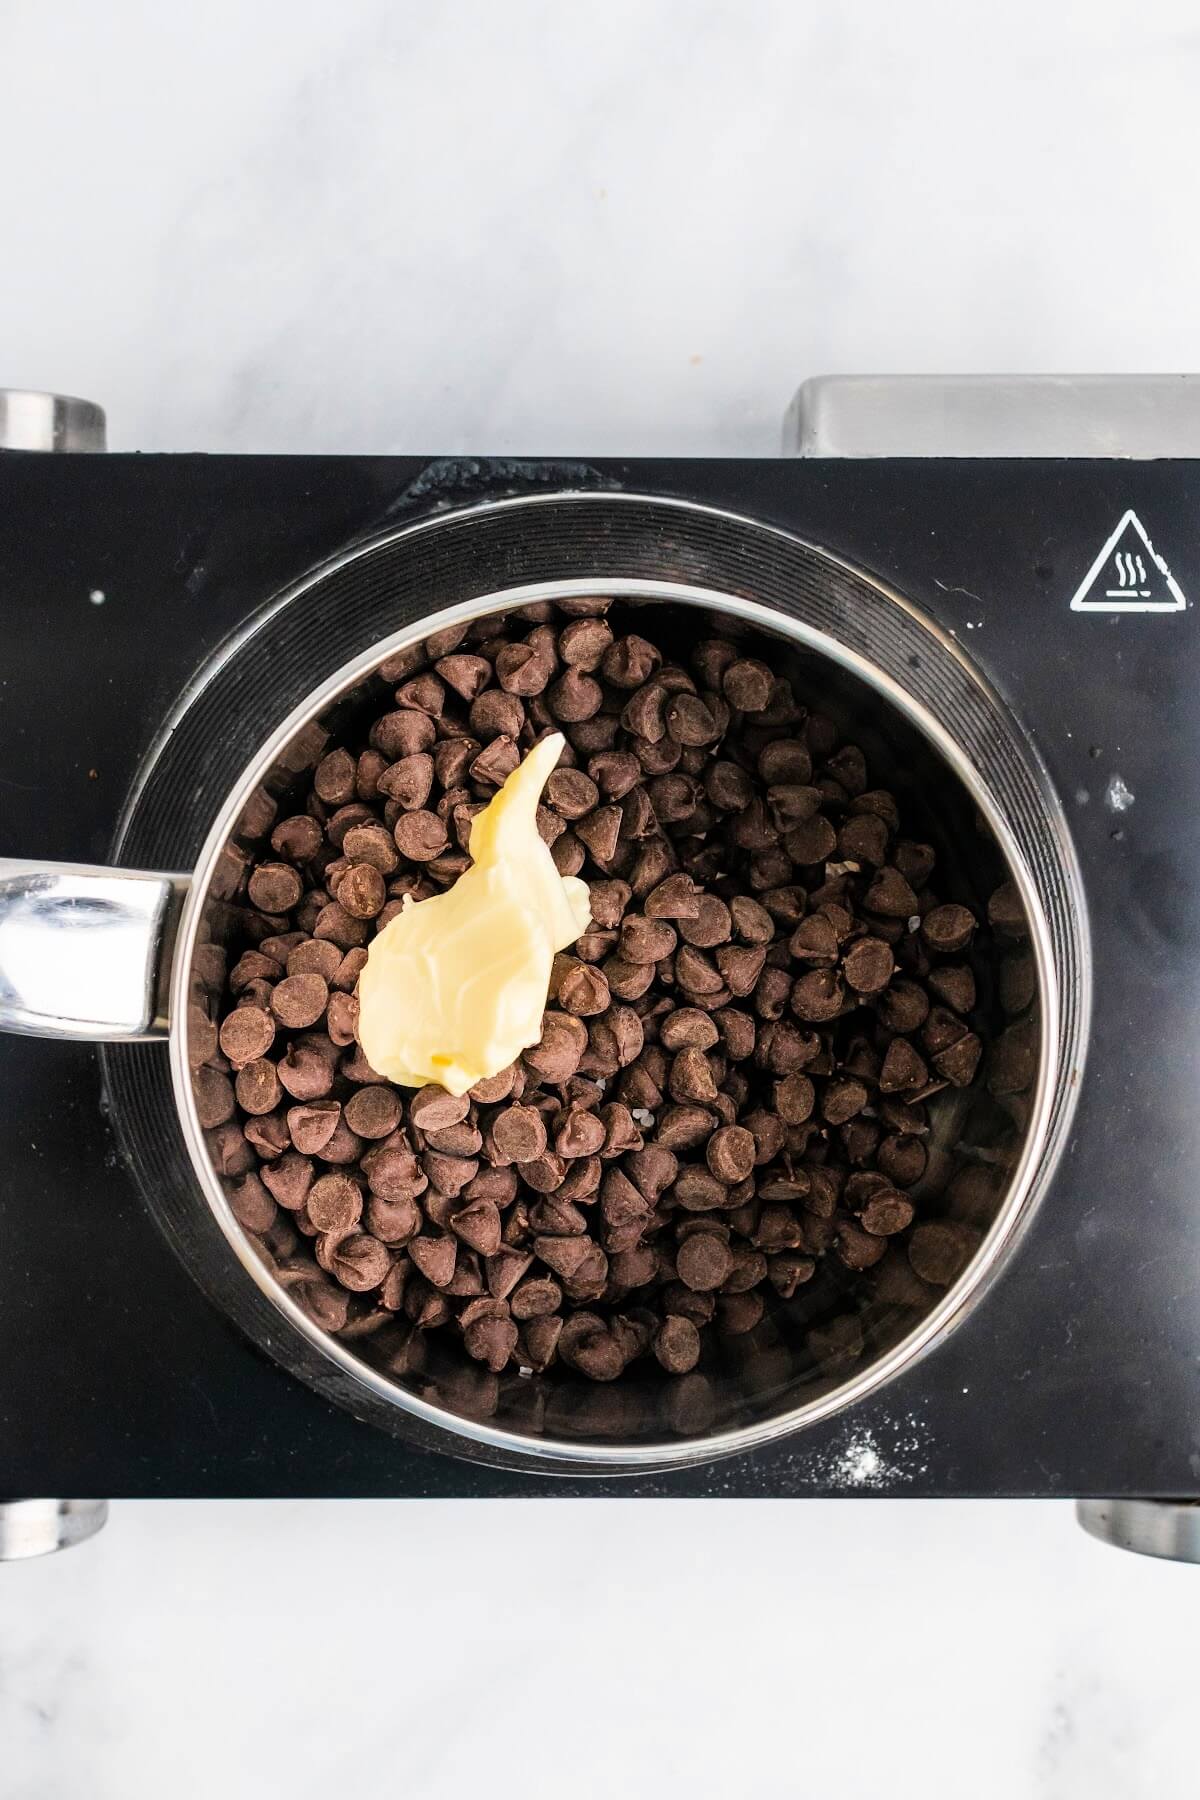 A saucepan filled with chocolate chips and a spoonful of butter sitting on top of an electric stovetop.